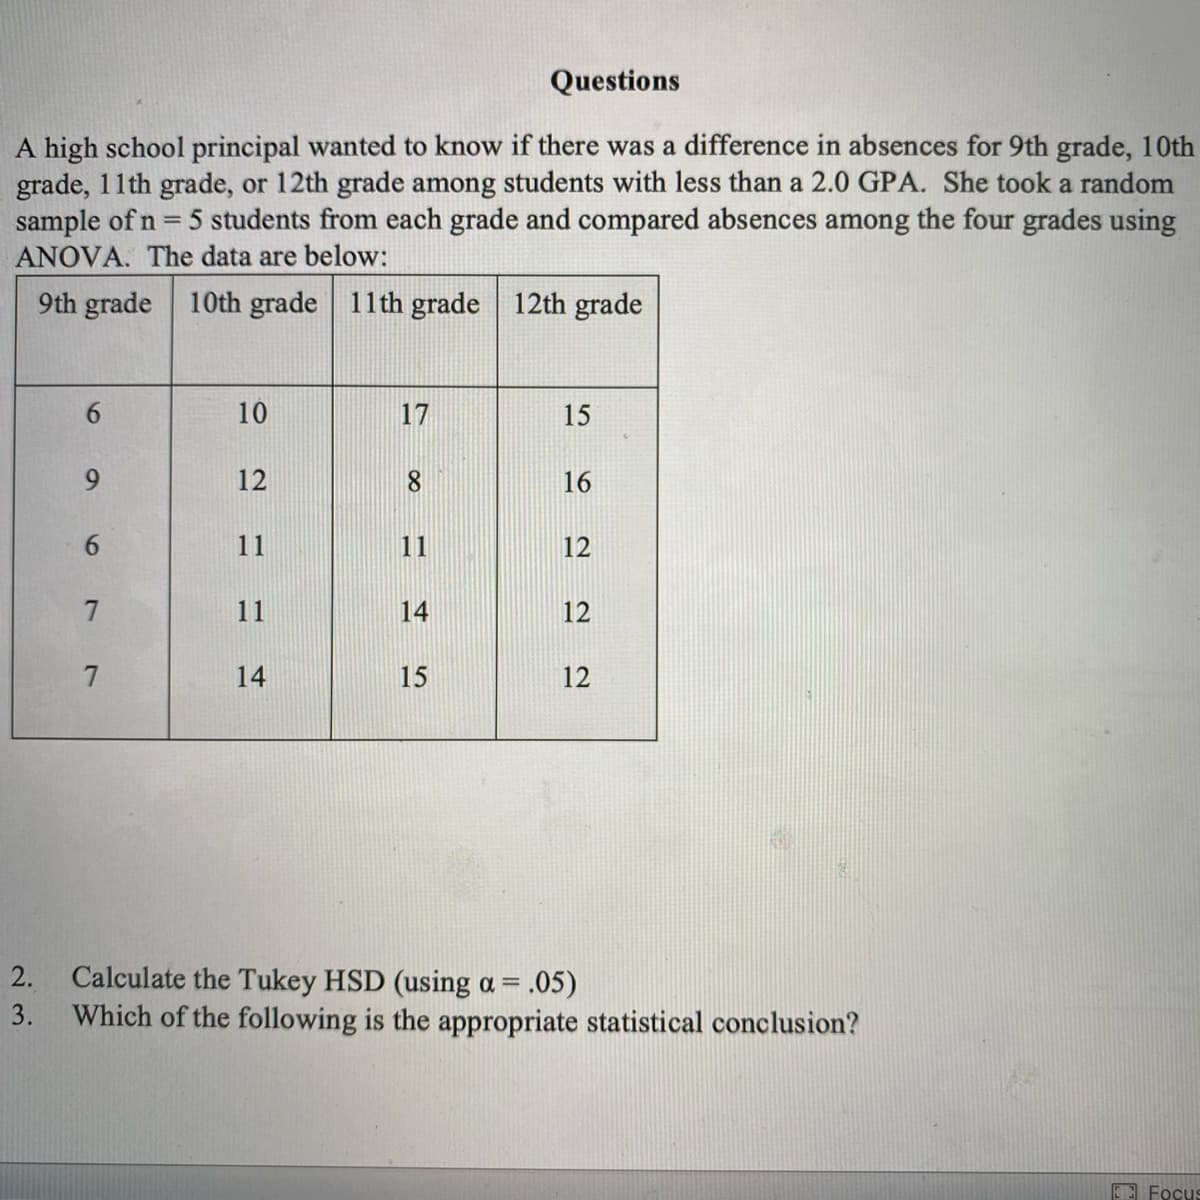 Questions
A high school principal wanted to know if there was a difference in absences for 9th grade, 10th
grade, 11th grade, or 12th grade among students with less than a 2.0 GPA. She took a random
sample of n = 5 students from each grade and compared absences among the four grades using
ANOVA. The data are below:
9th grade 10th grade 11th grade 12th grade
6.
10
17
15
6.
12
8.
16
11
11
12
7
11
14
12
7
14
15
12
Calculate the Tukey HSD (using a = .05)
3. Which of the following is the appropriate statistical conclusion?
2.
E Focus
6
